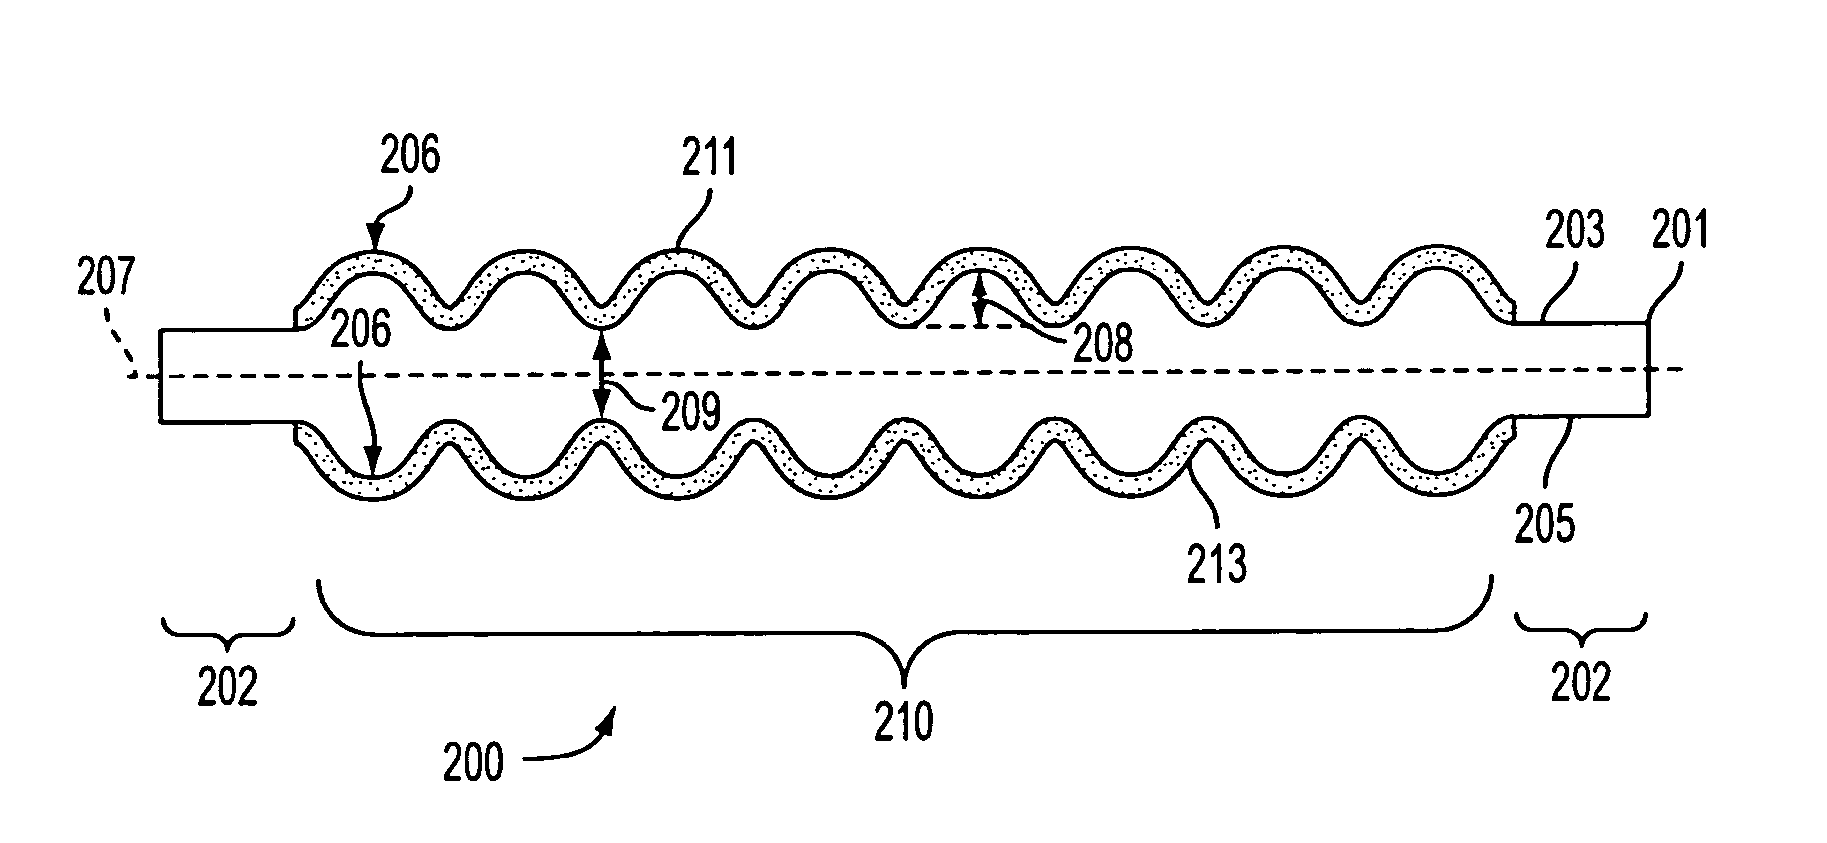 Textured electrolyte for a solid oxide fuel cell